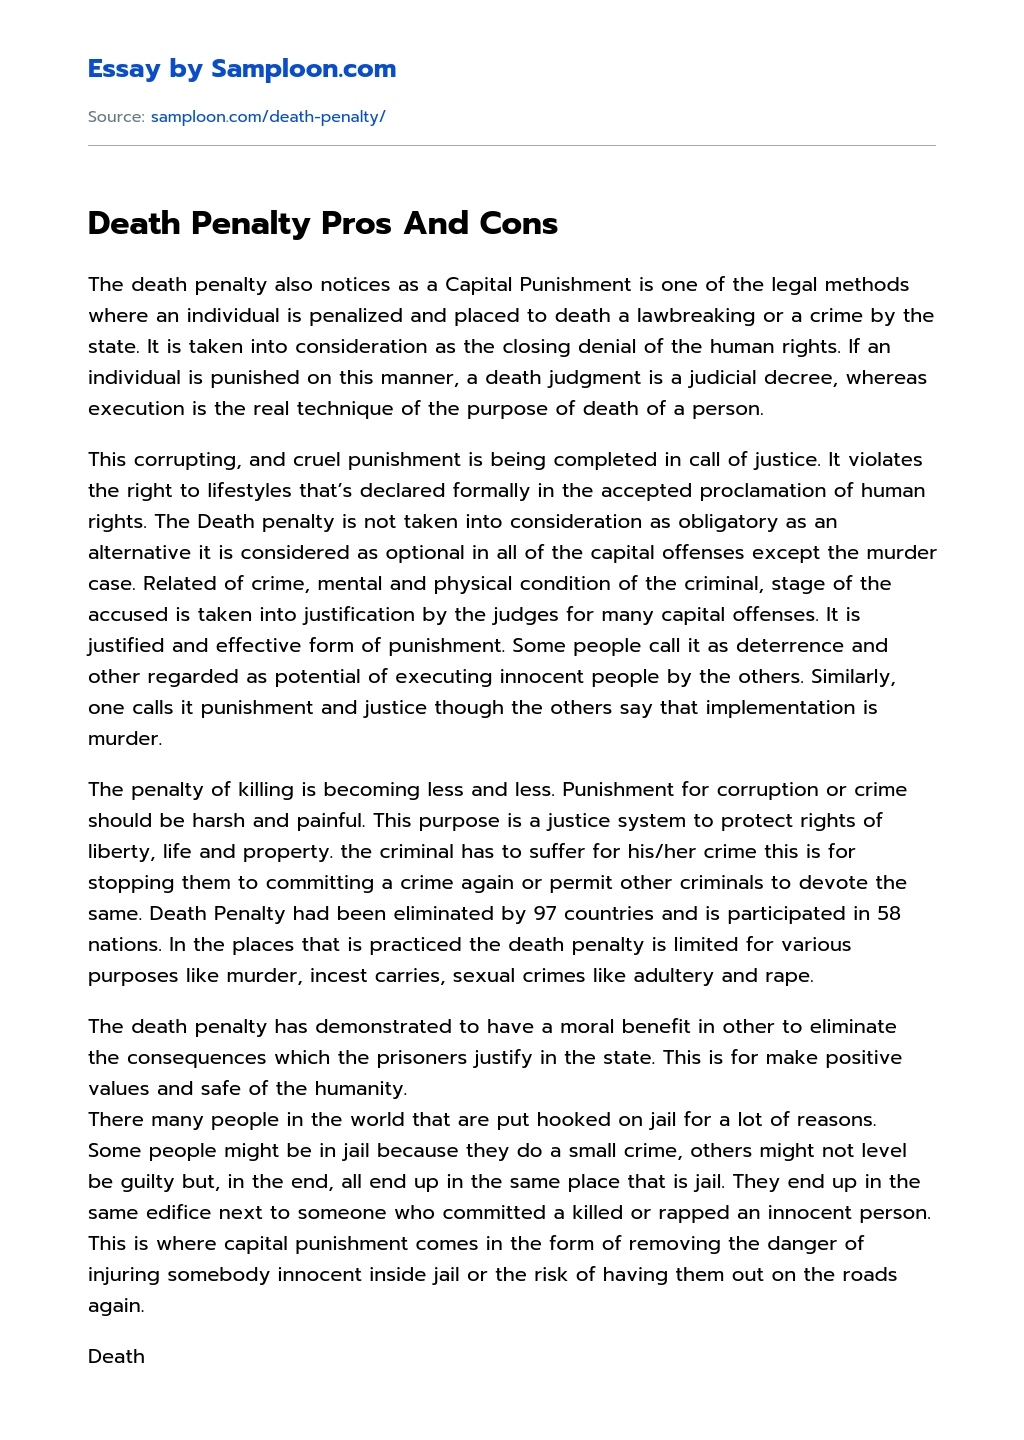 Death Penalty Pros And Cons essay